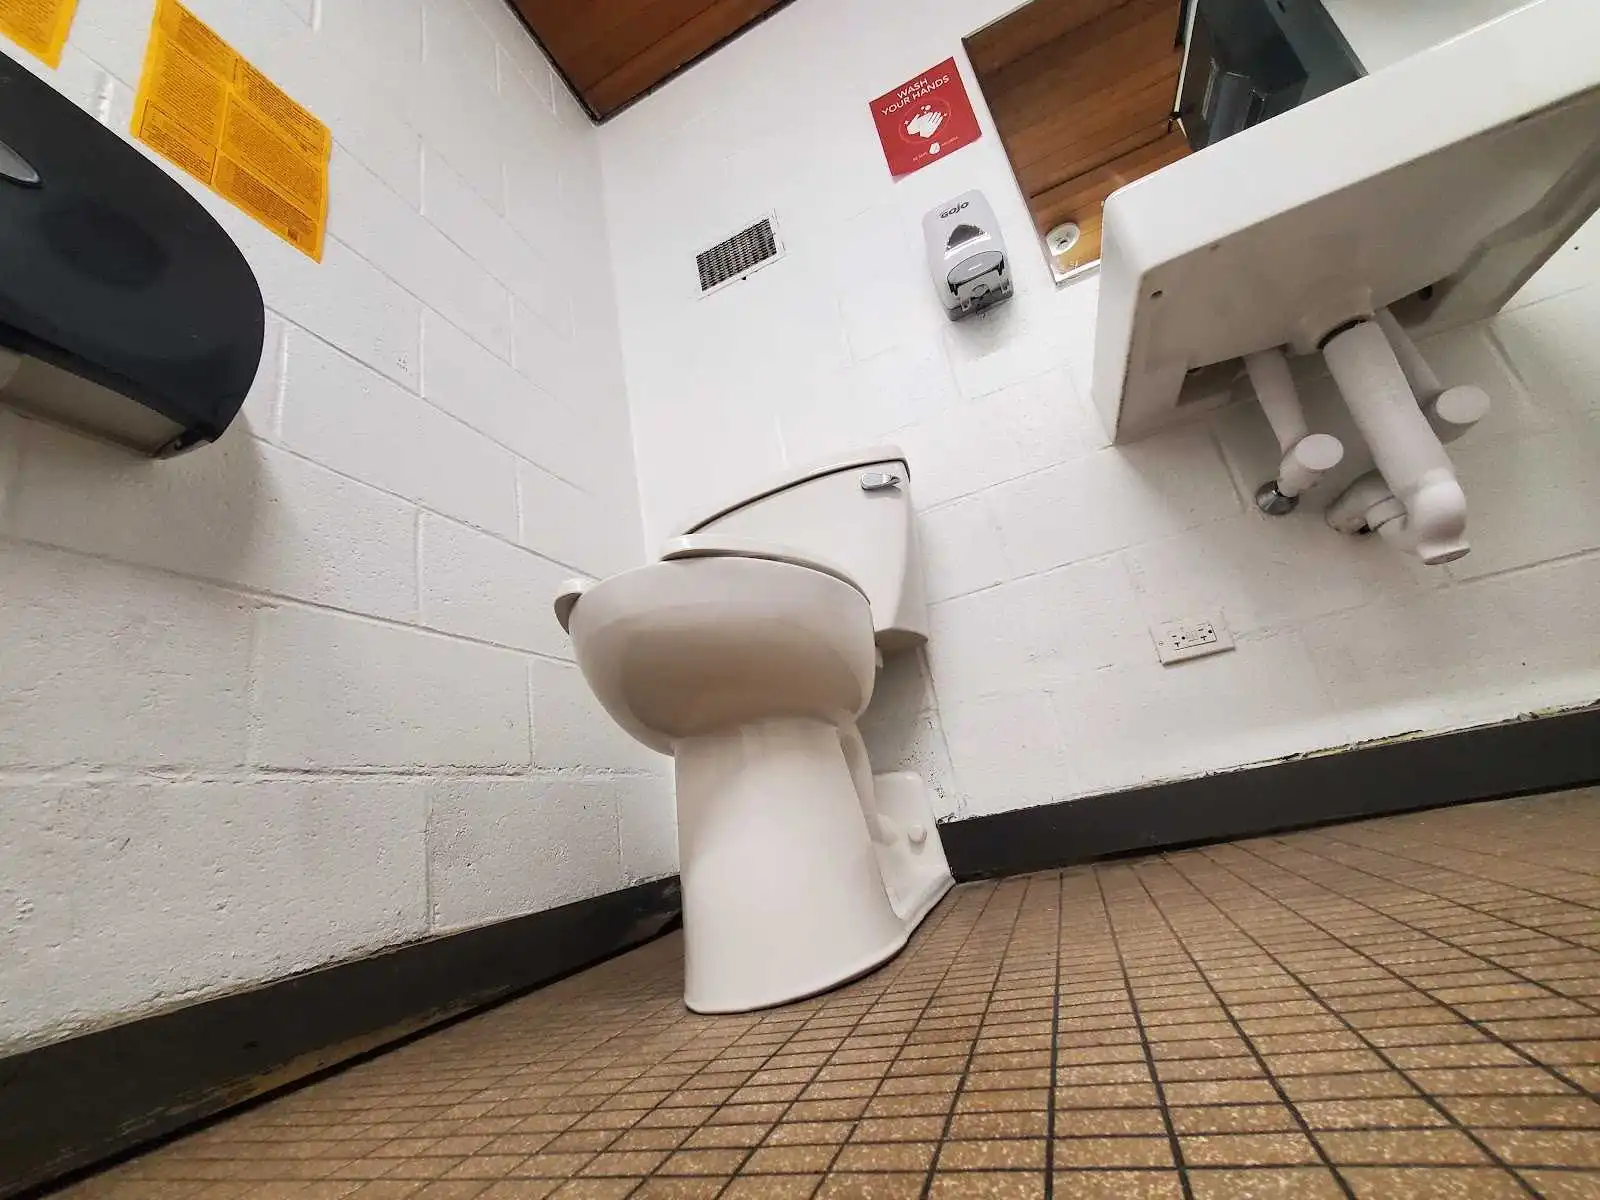 A toilet in the commons.